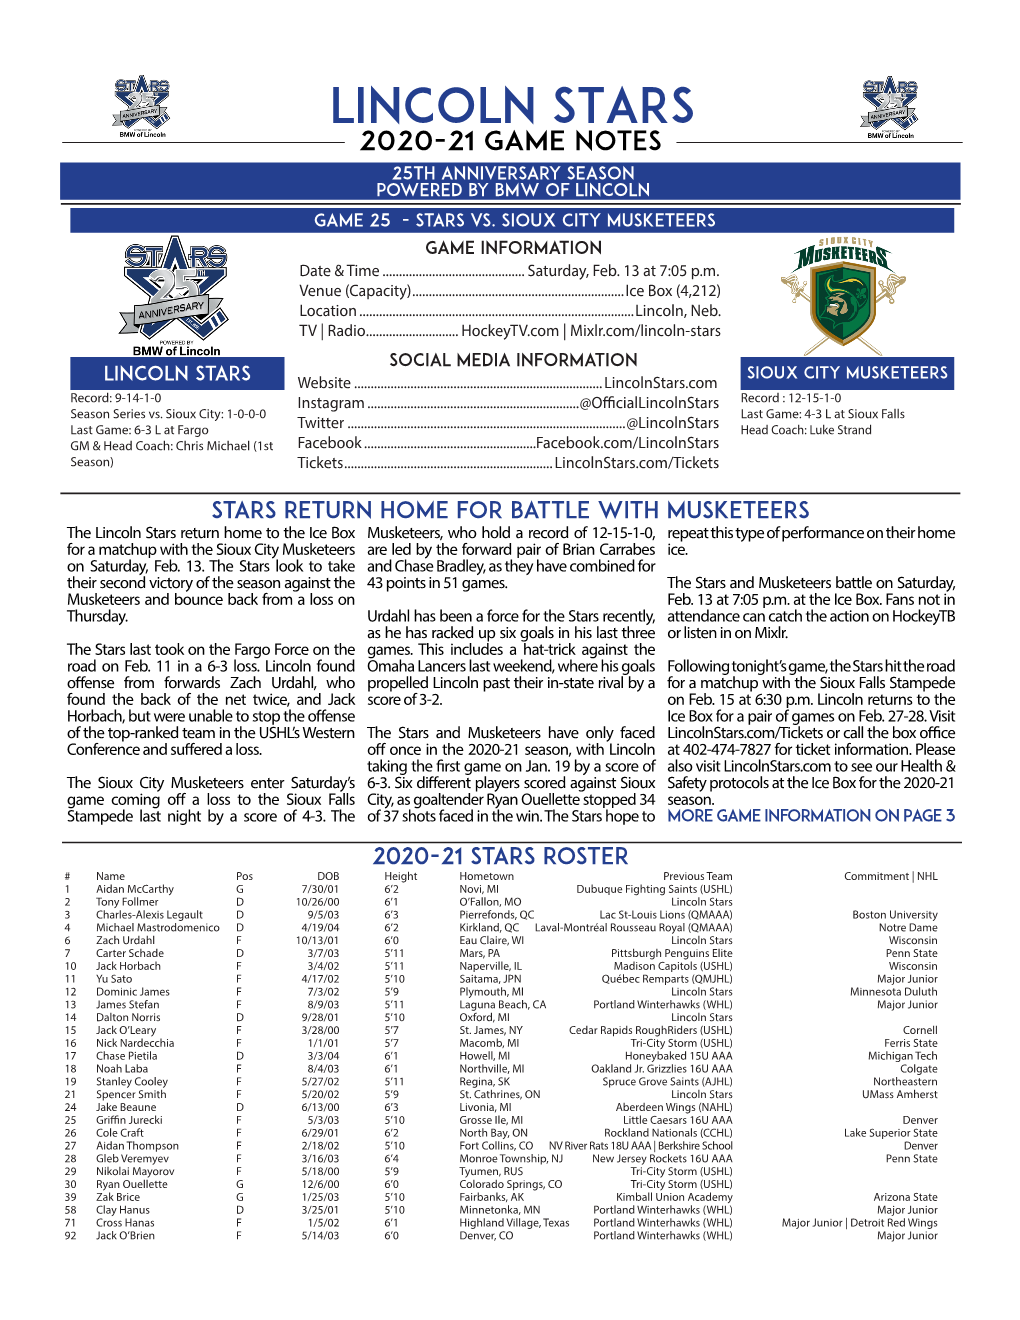 LINCOLN STARS 2020-21 GAME NOTES 25TH ANNIVERSARY SEASON Powered by BMW of LINCOLN GAME 25 - STARS Vs